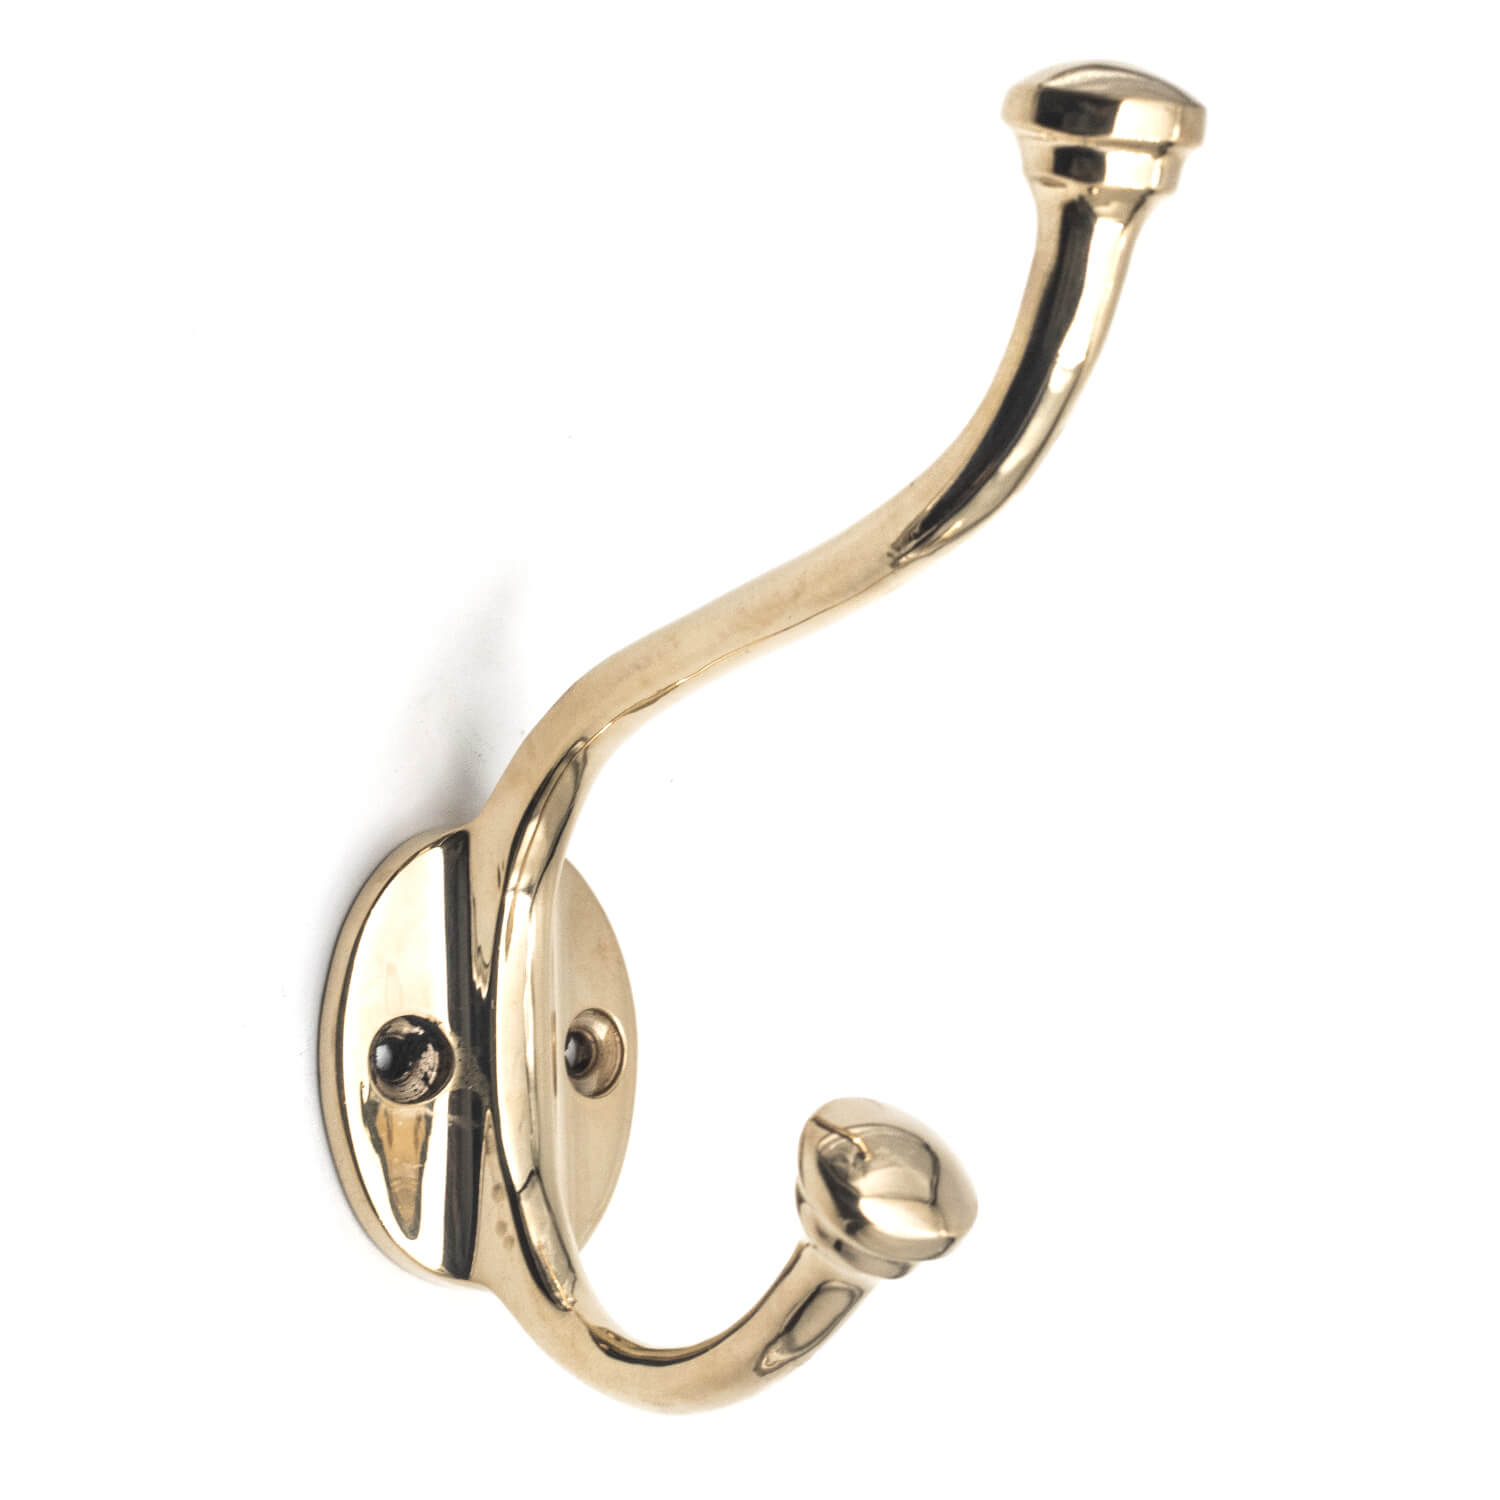 Aged Brass Double Coat and Hat Hook